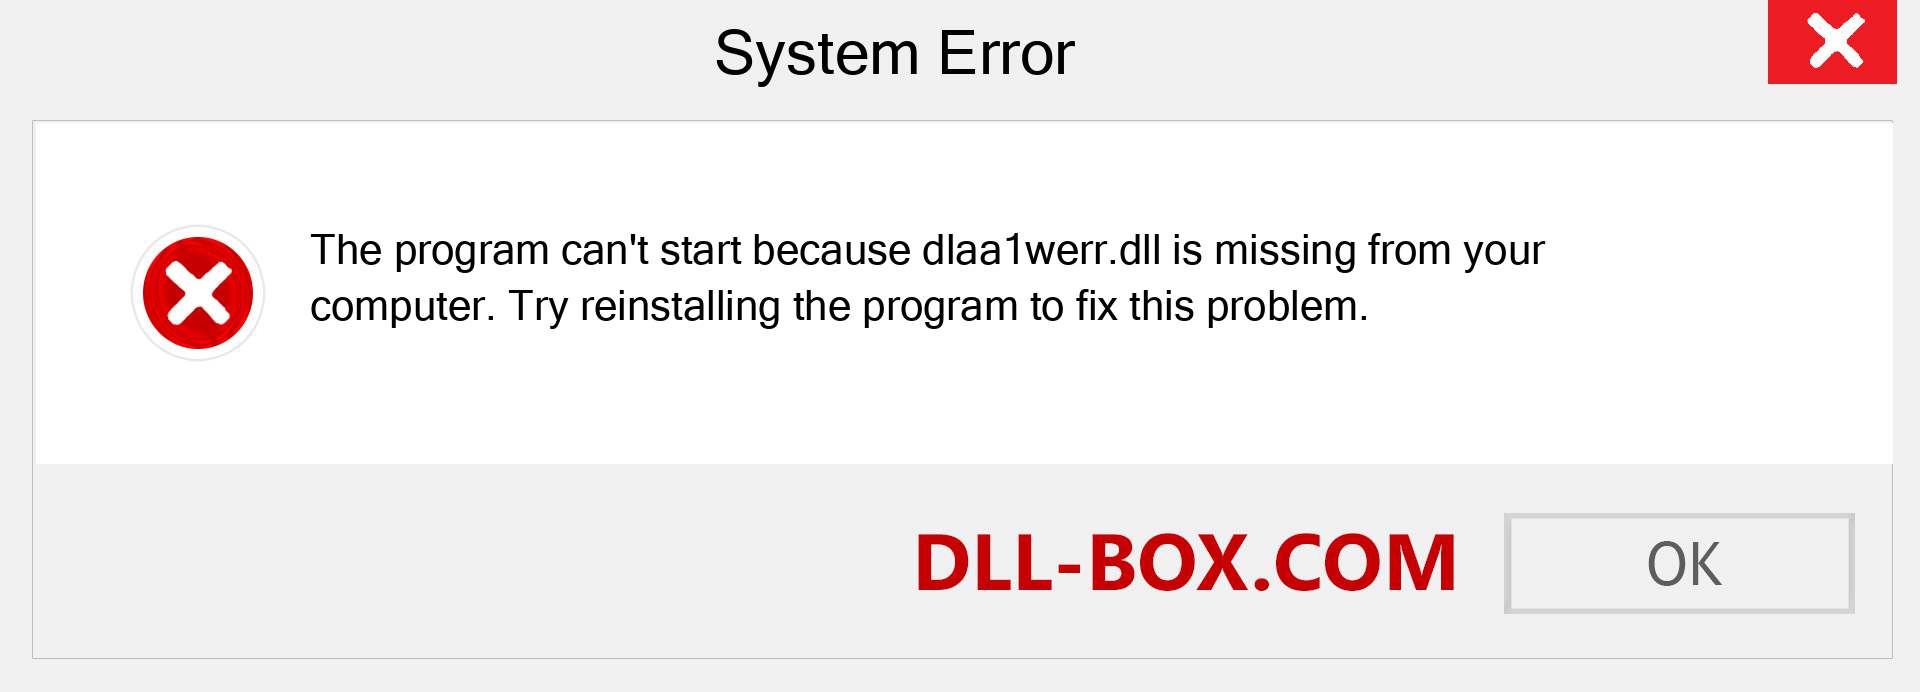  dlaa1werr.dll file is missing?. Download for Windows 7, 8, 10 - Fix  dlaa1werr dll Missing Error on Windows, photos, images